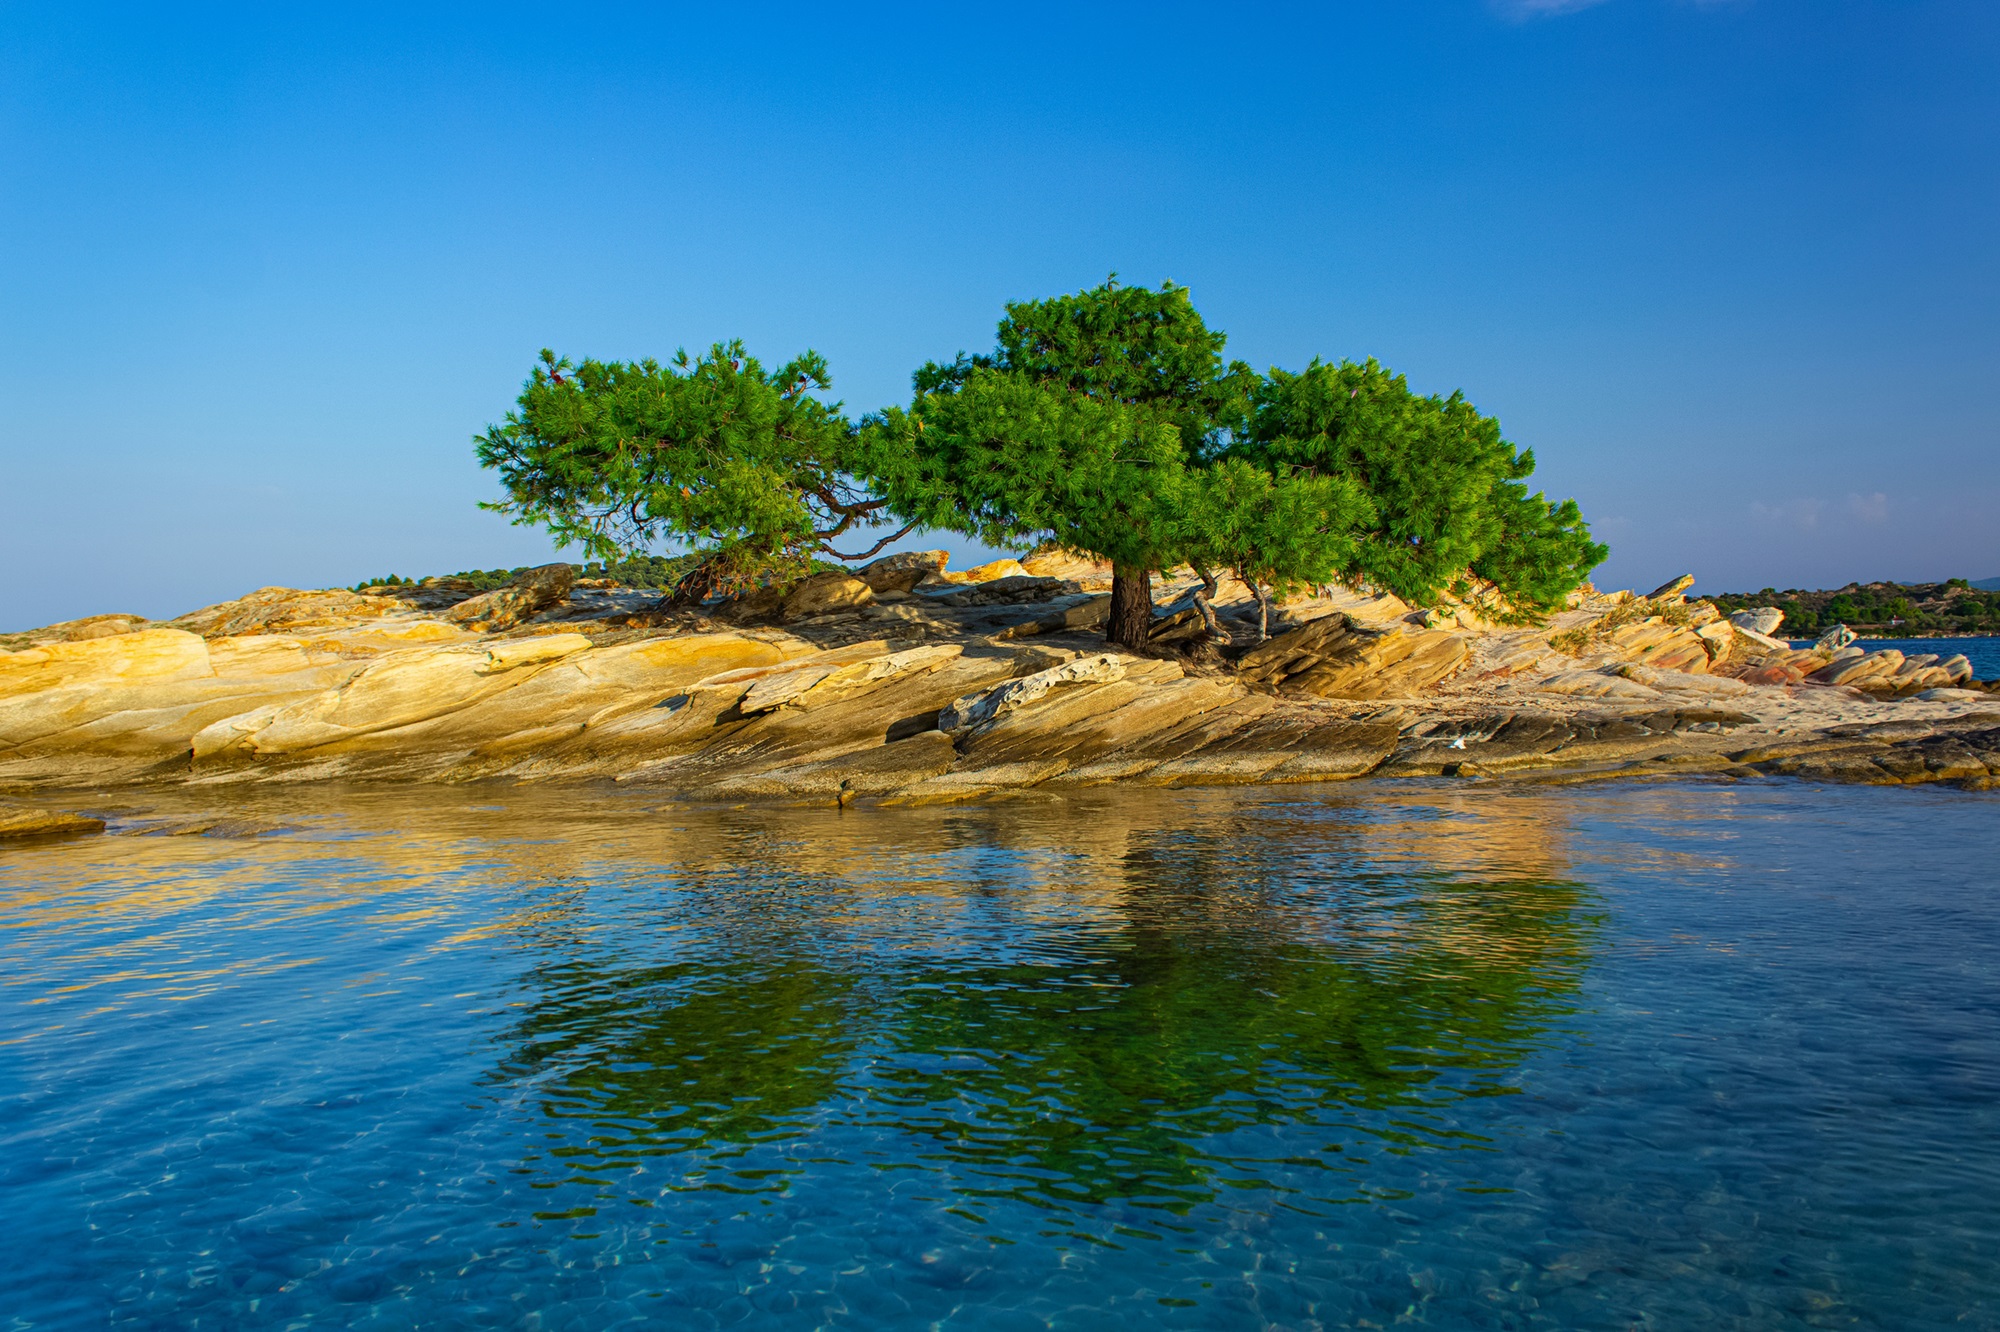 A small, rocky island topped by an evergreen tree is in the blue-green Mediterranean Sea. The sky above is clear and land sits behind the island.